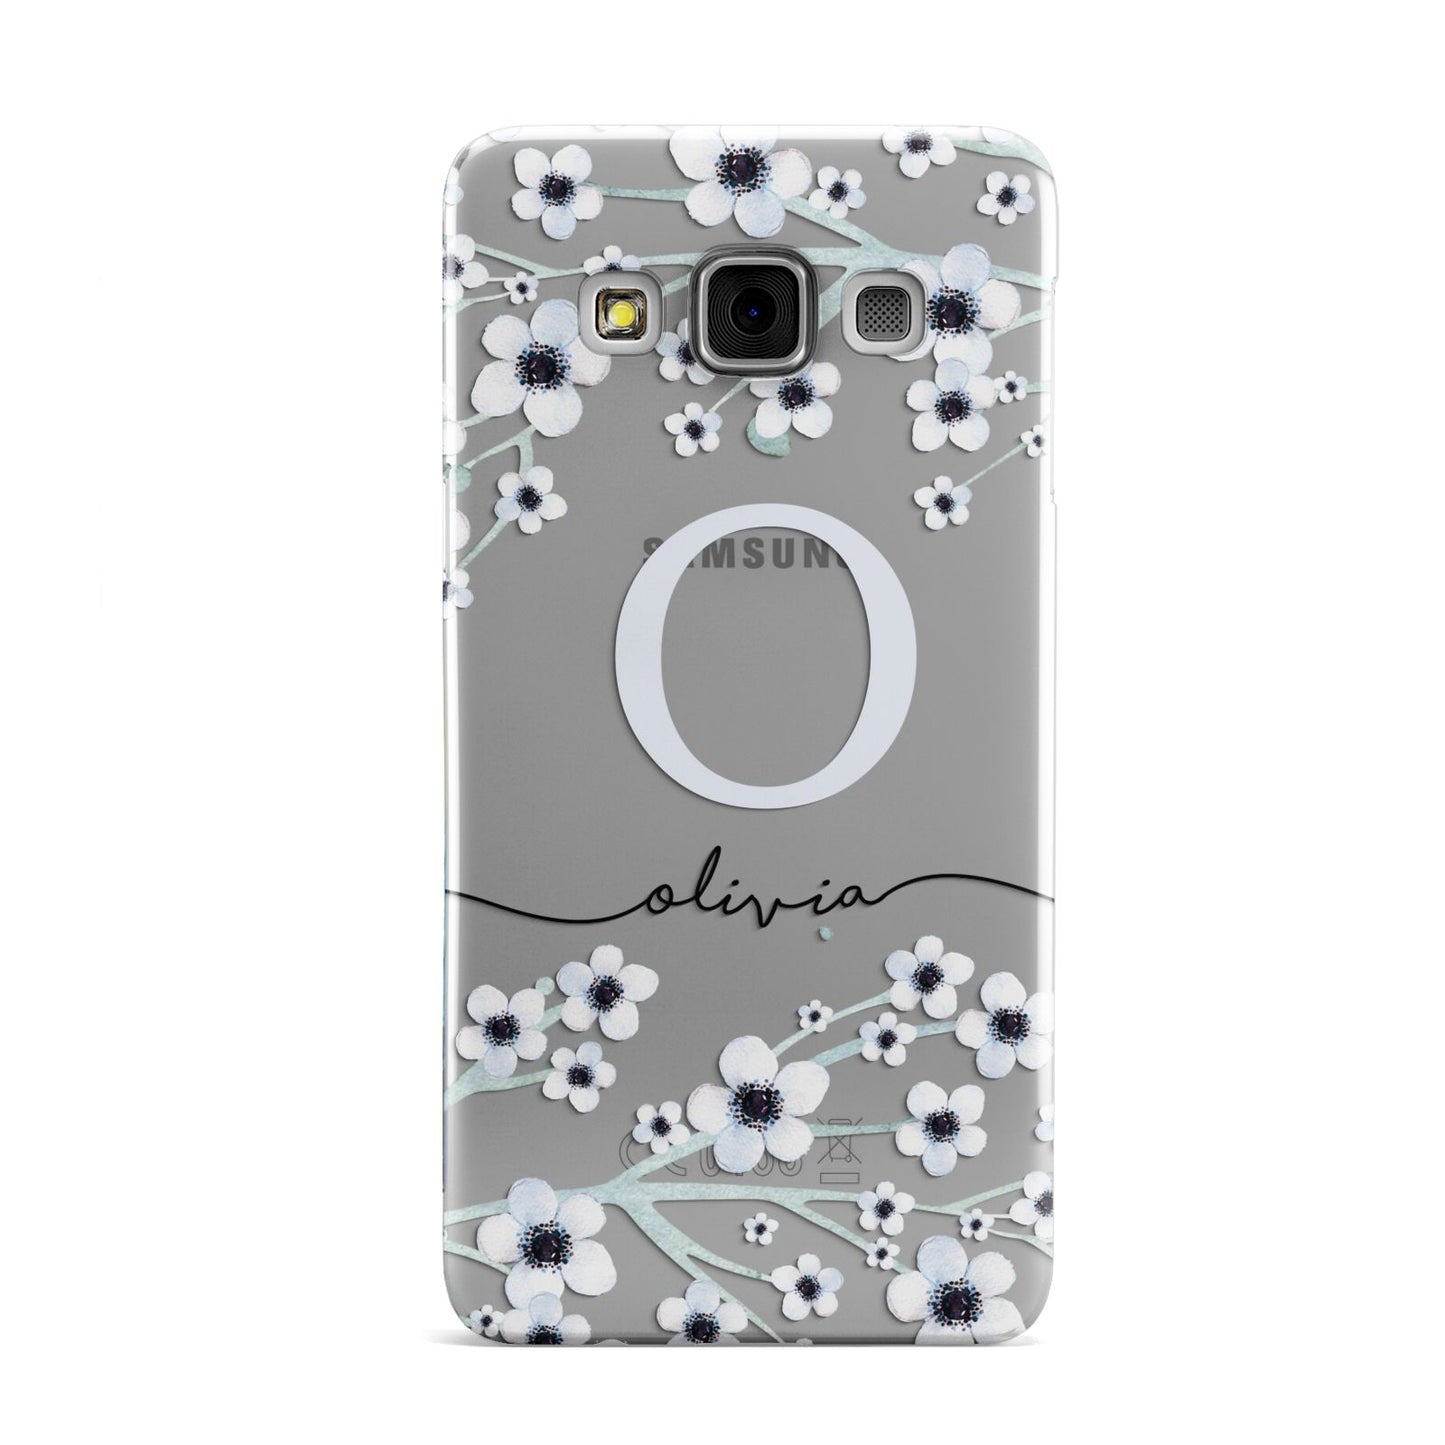 Personalised White Flower Samsung Galaxy A3 Case